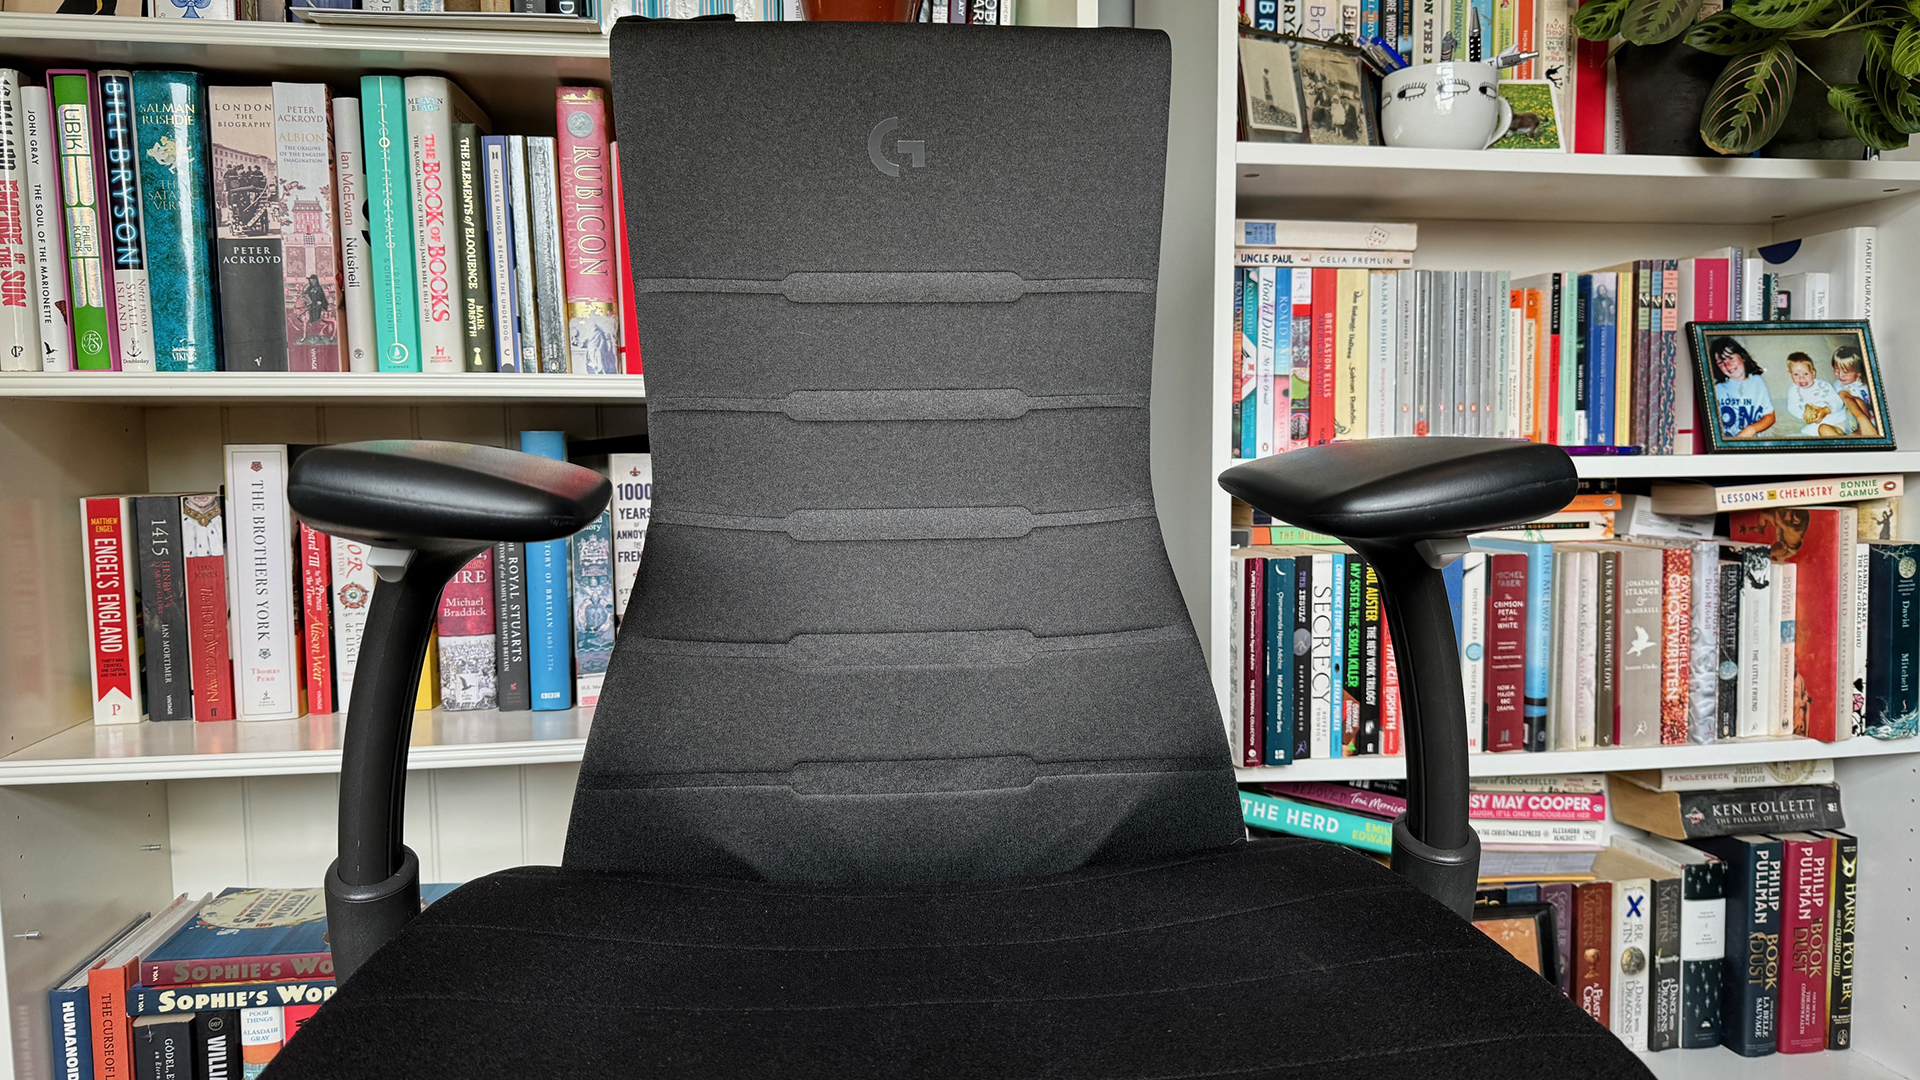 The Herman Miller Embody's arm rests pulled up fully.